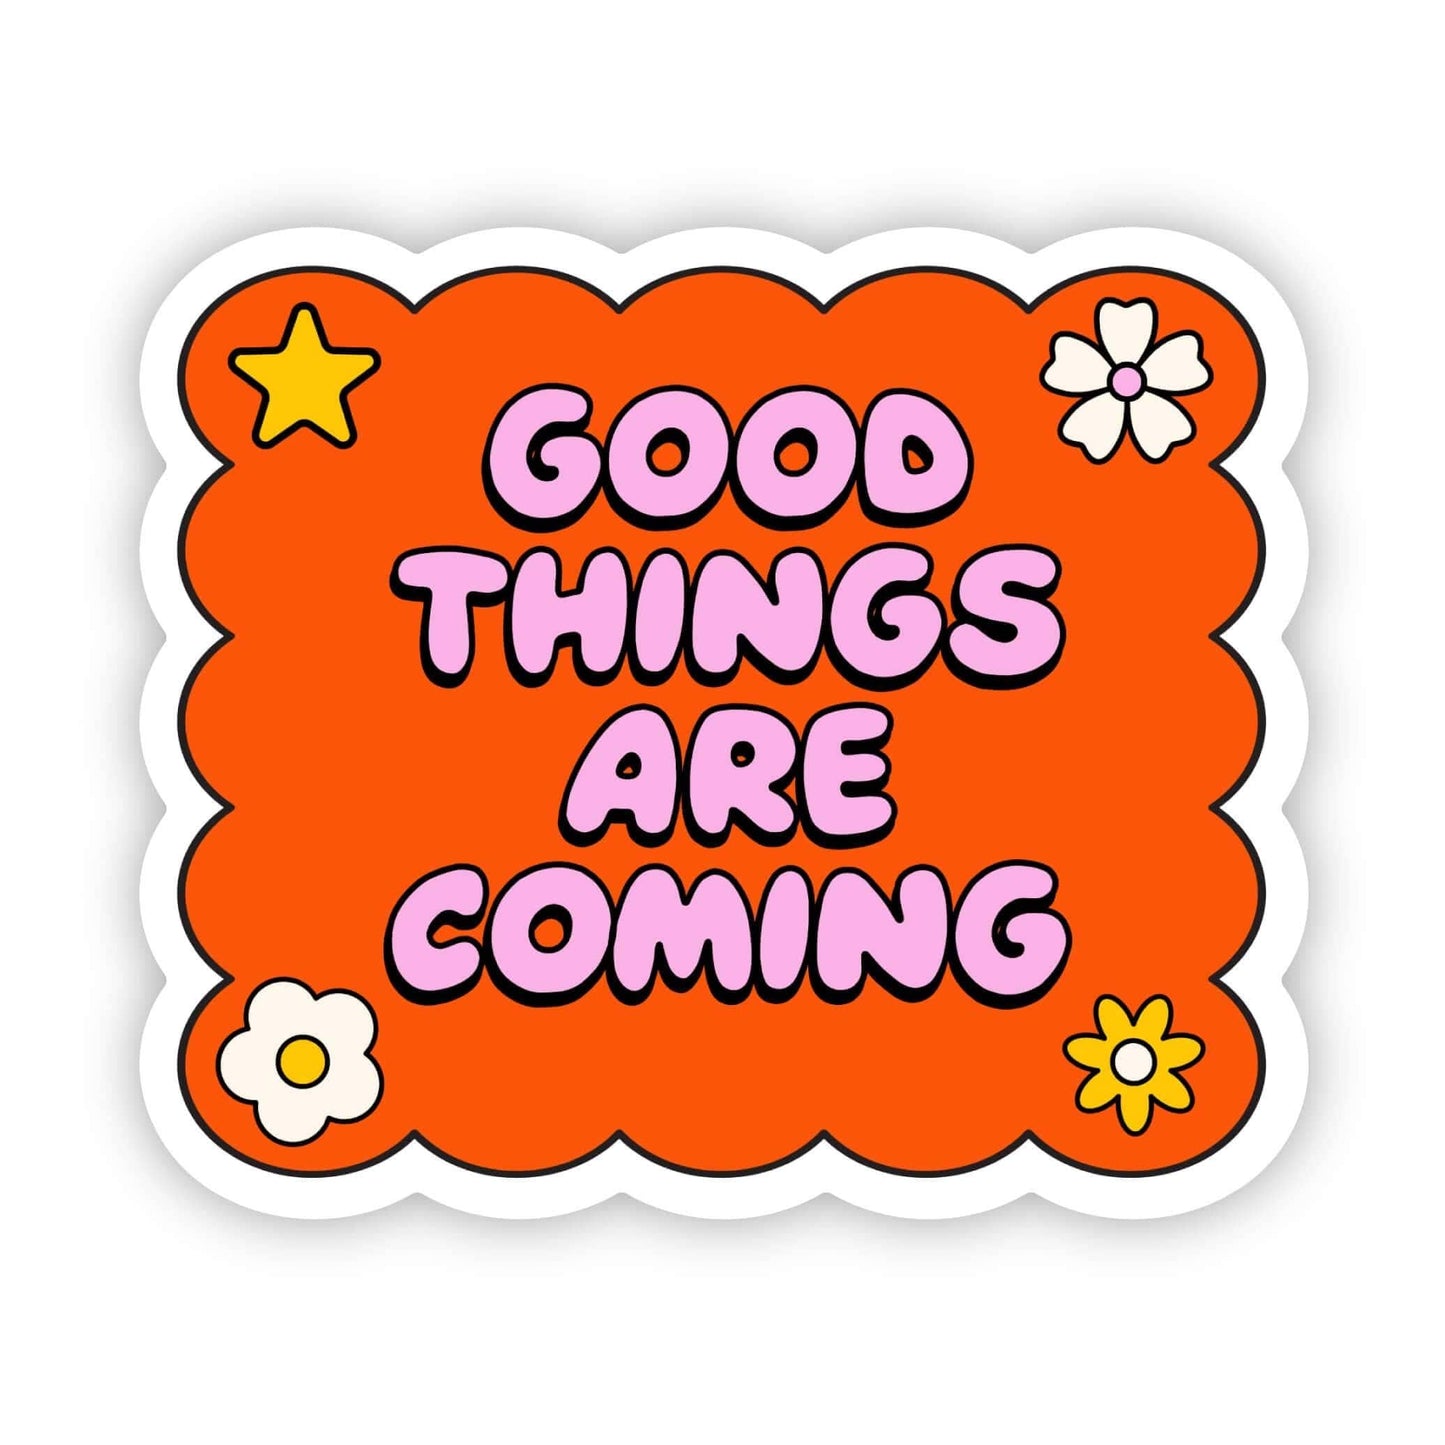 Good things are coming